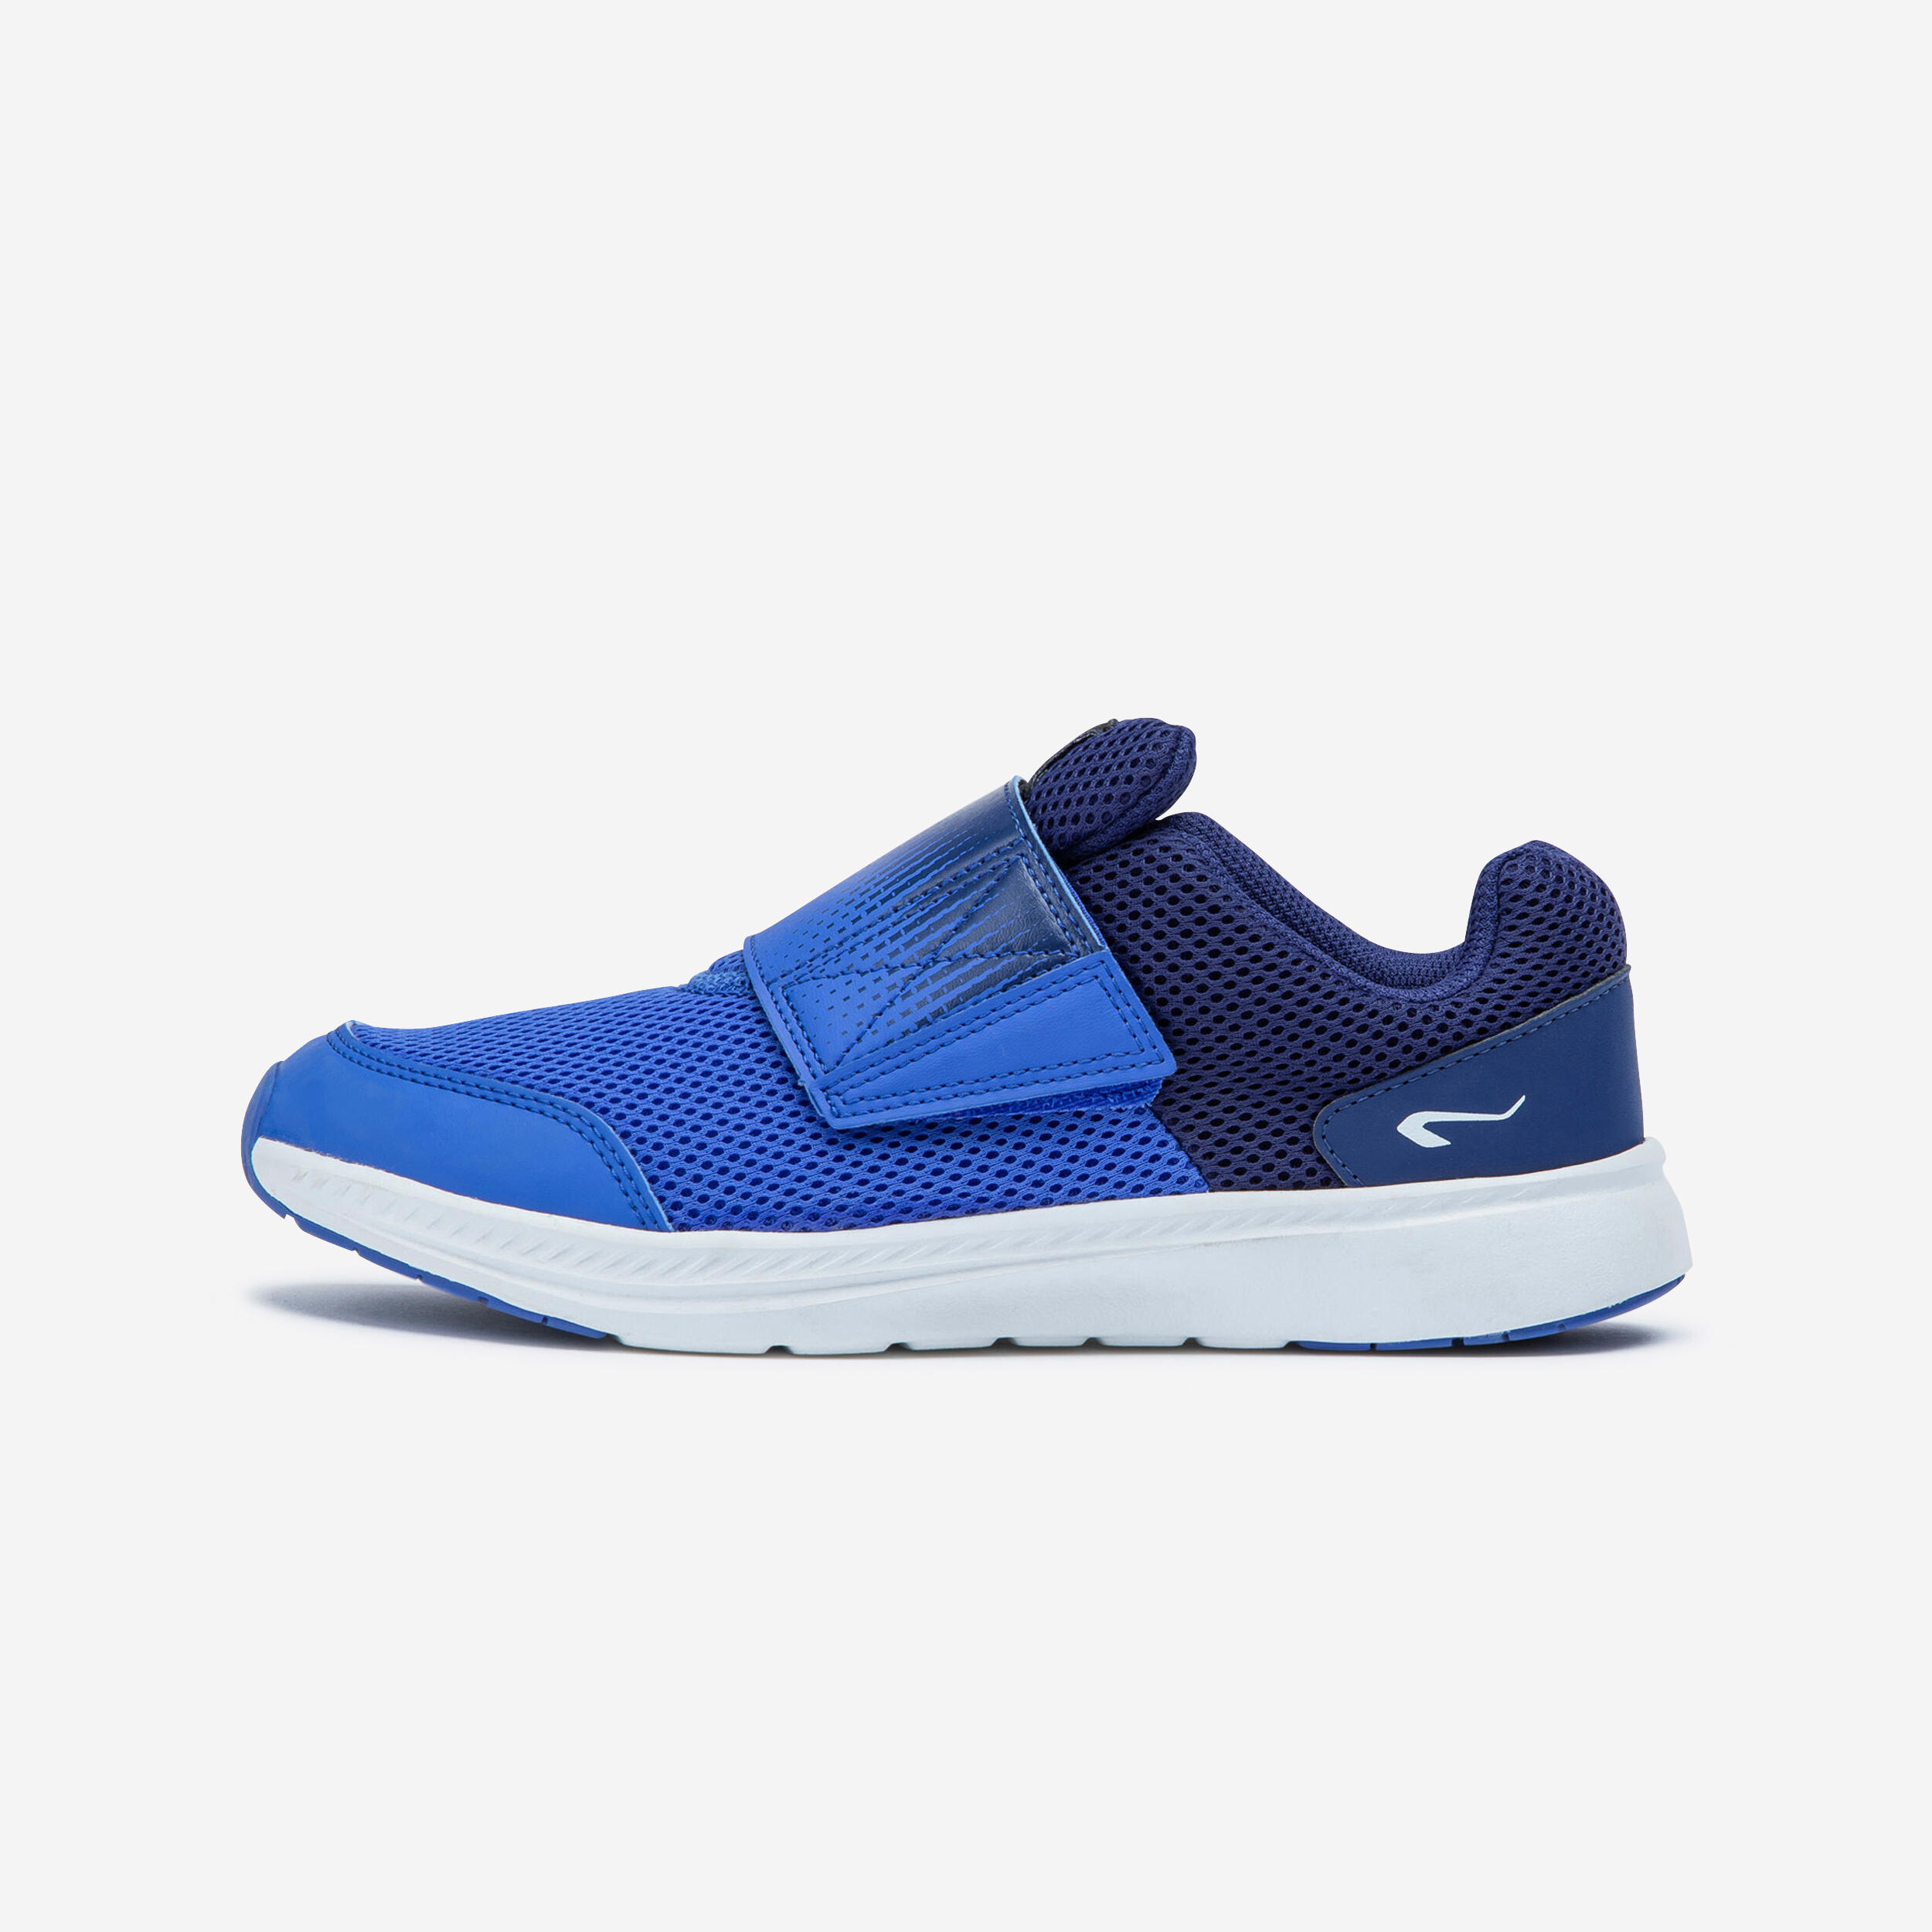 Decathlon Sports Bangladesh - Are you a regular runner looking for good  cushioning and support in your running shoes? KALENJI RUN SUPPORT will  fulfill your expectation. This shoe is very lightweight and